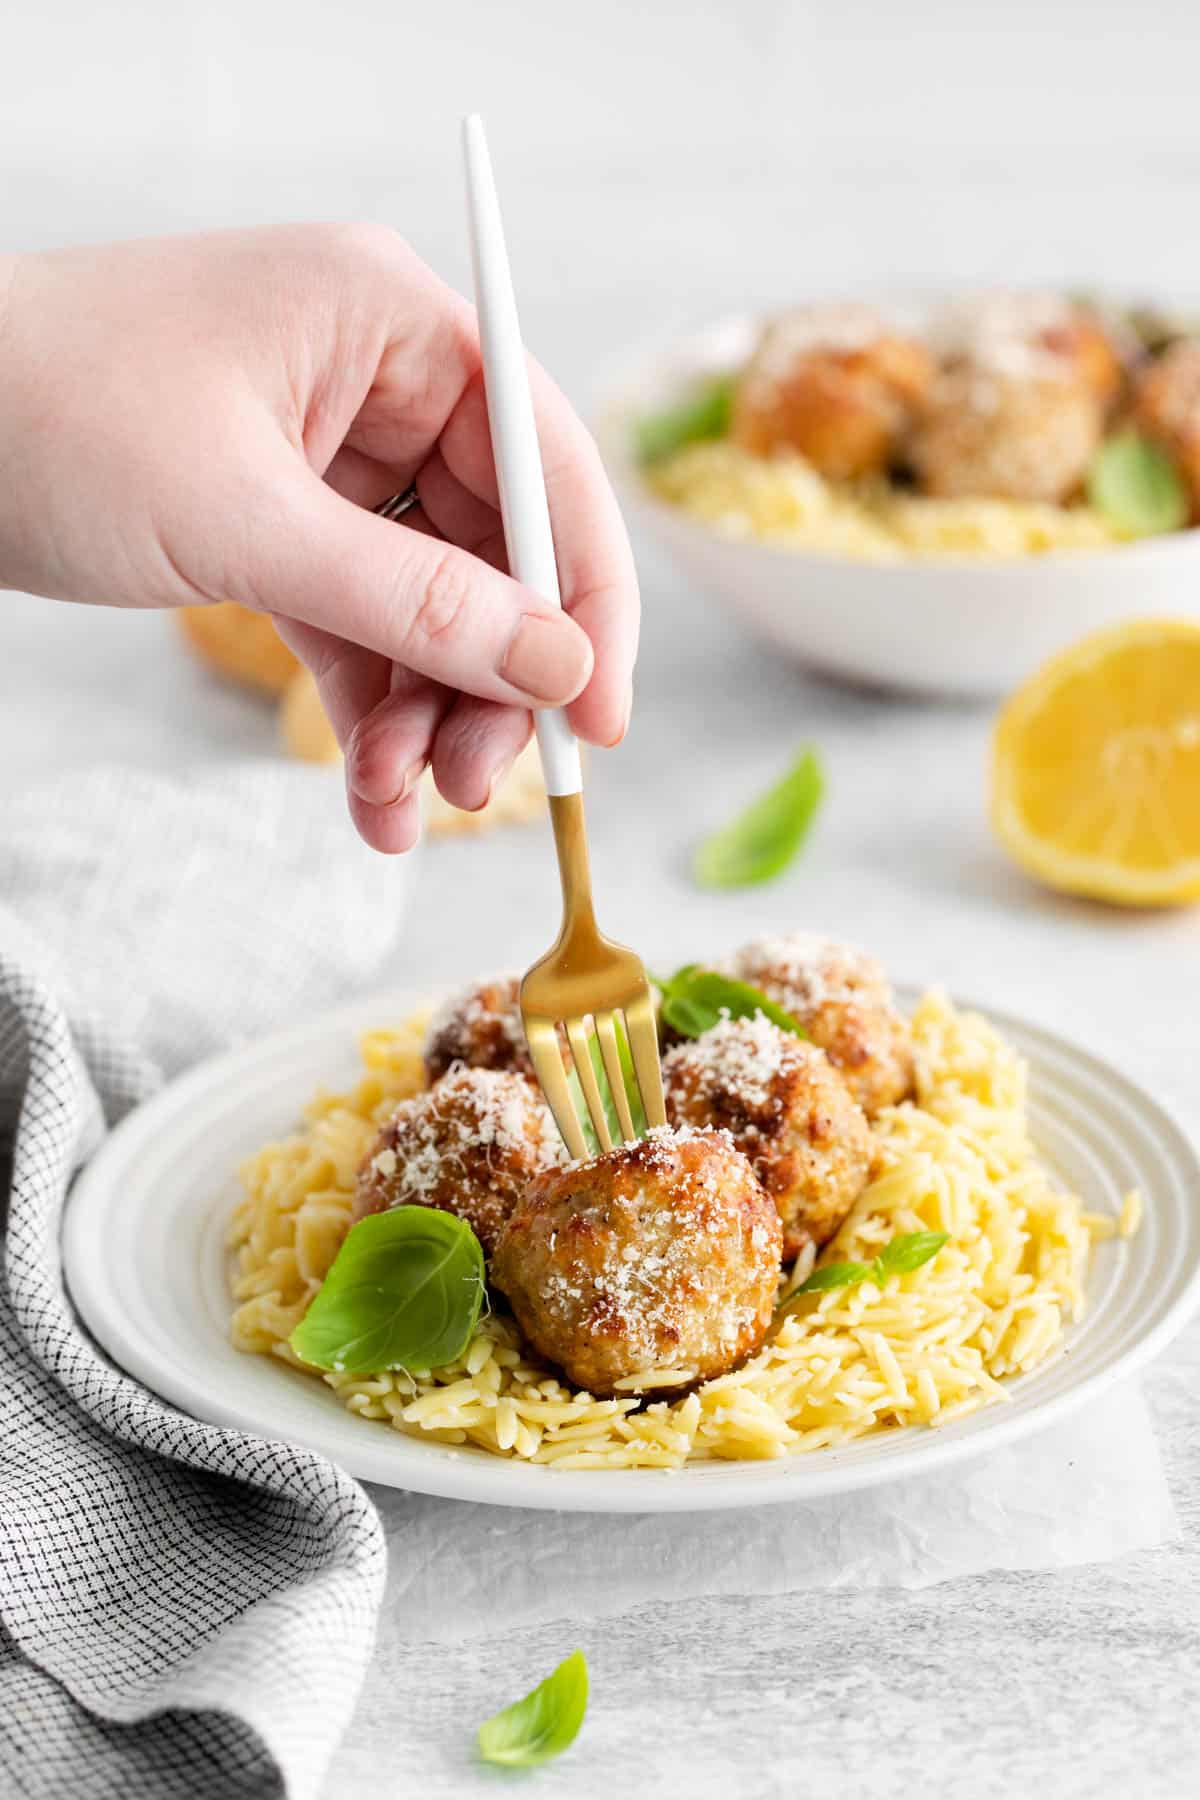 A fork spearing a lemon chicken meatball on a plate.